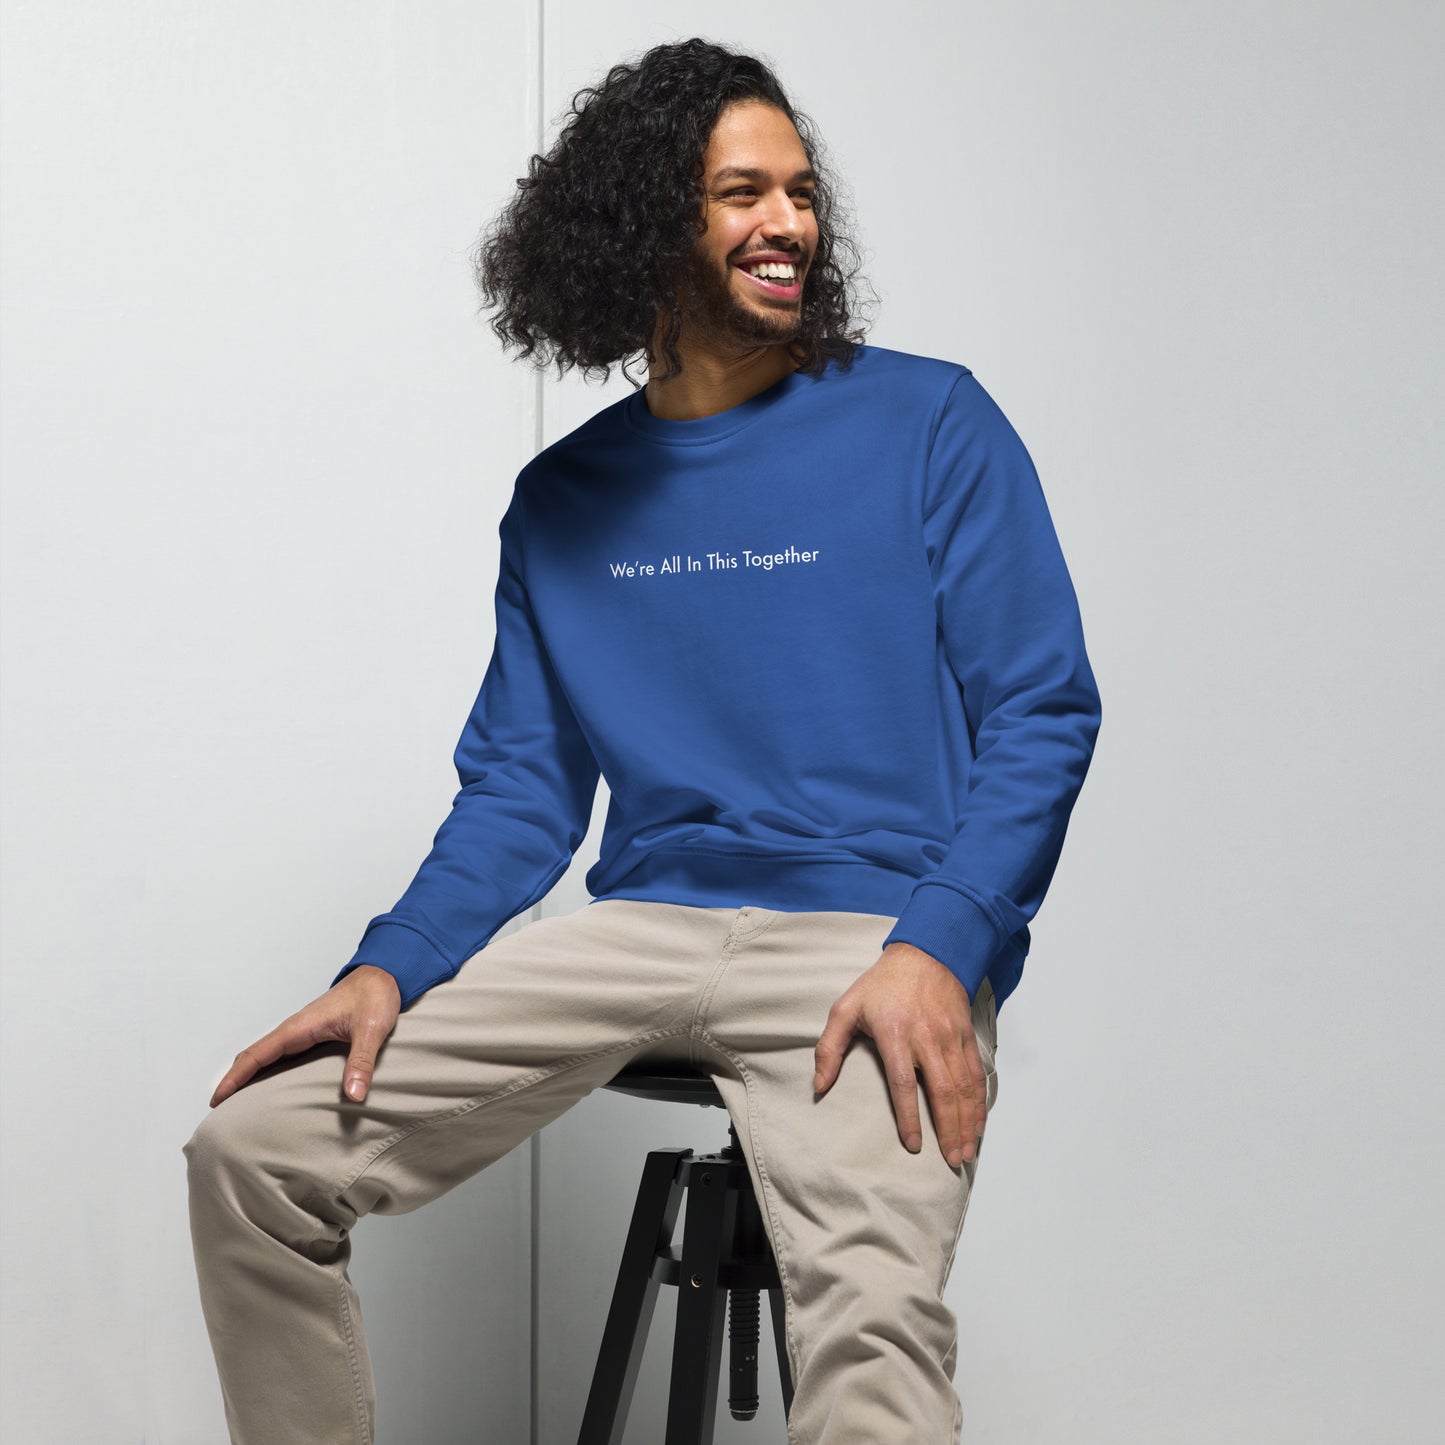 We're All In This Together Men's Organic Cotton Sweatshirt